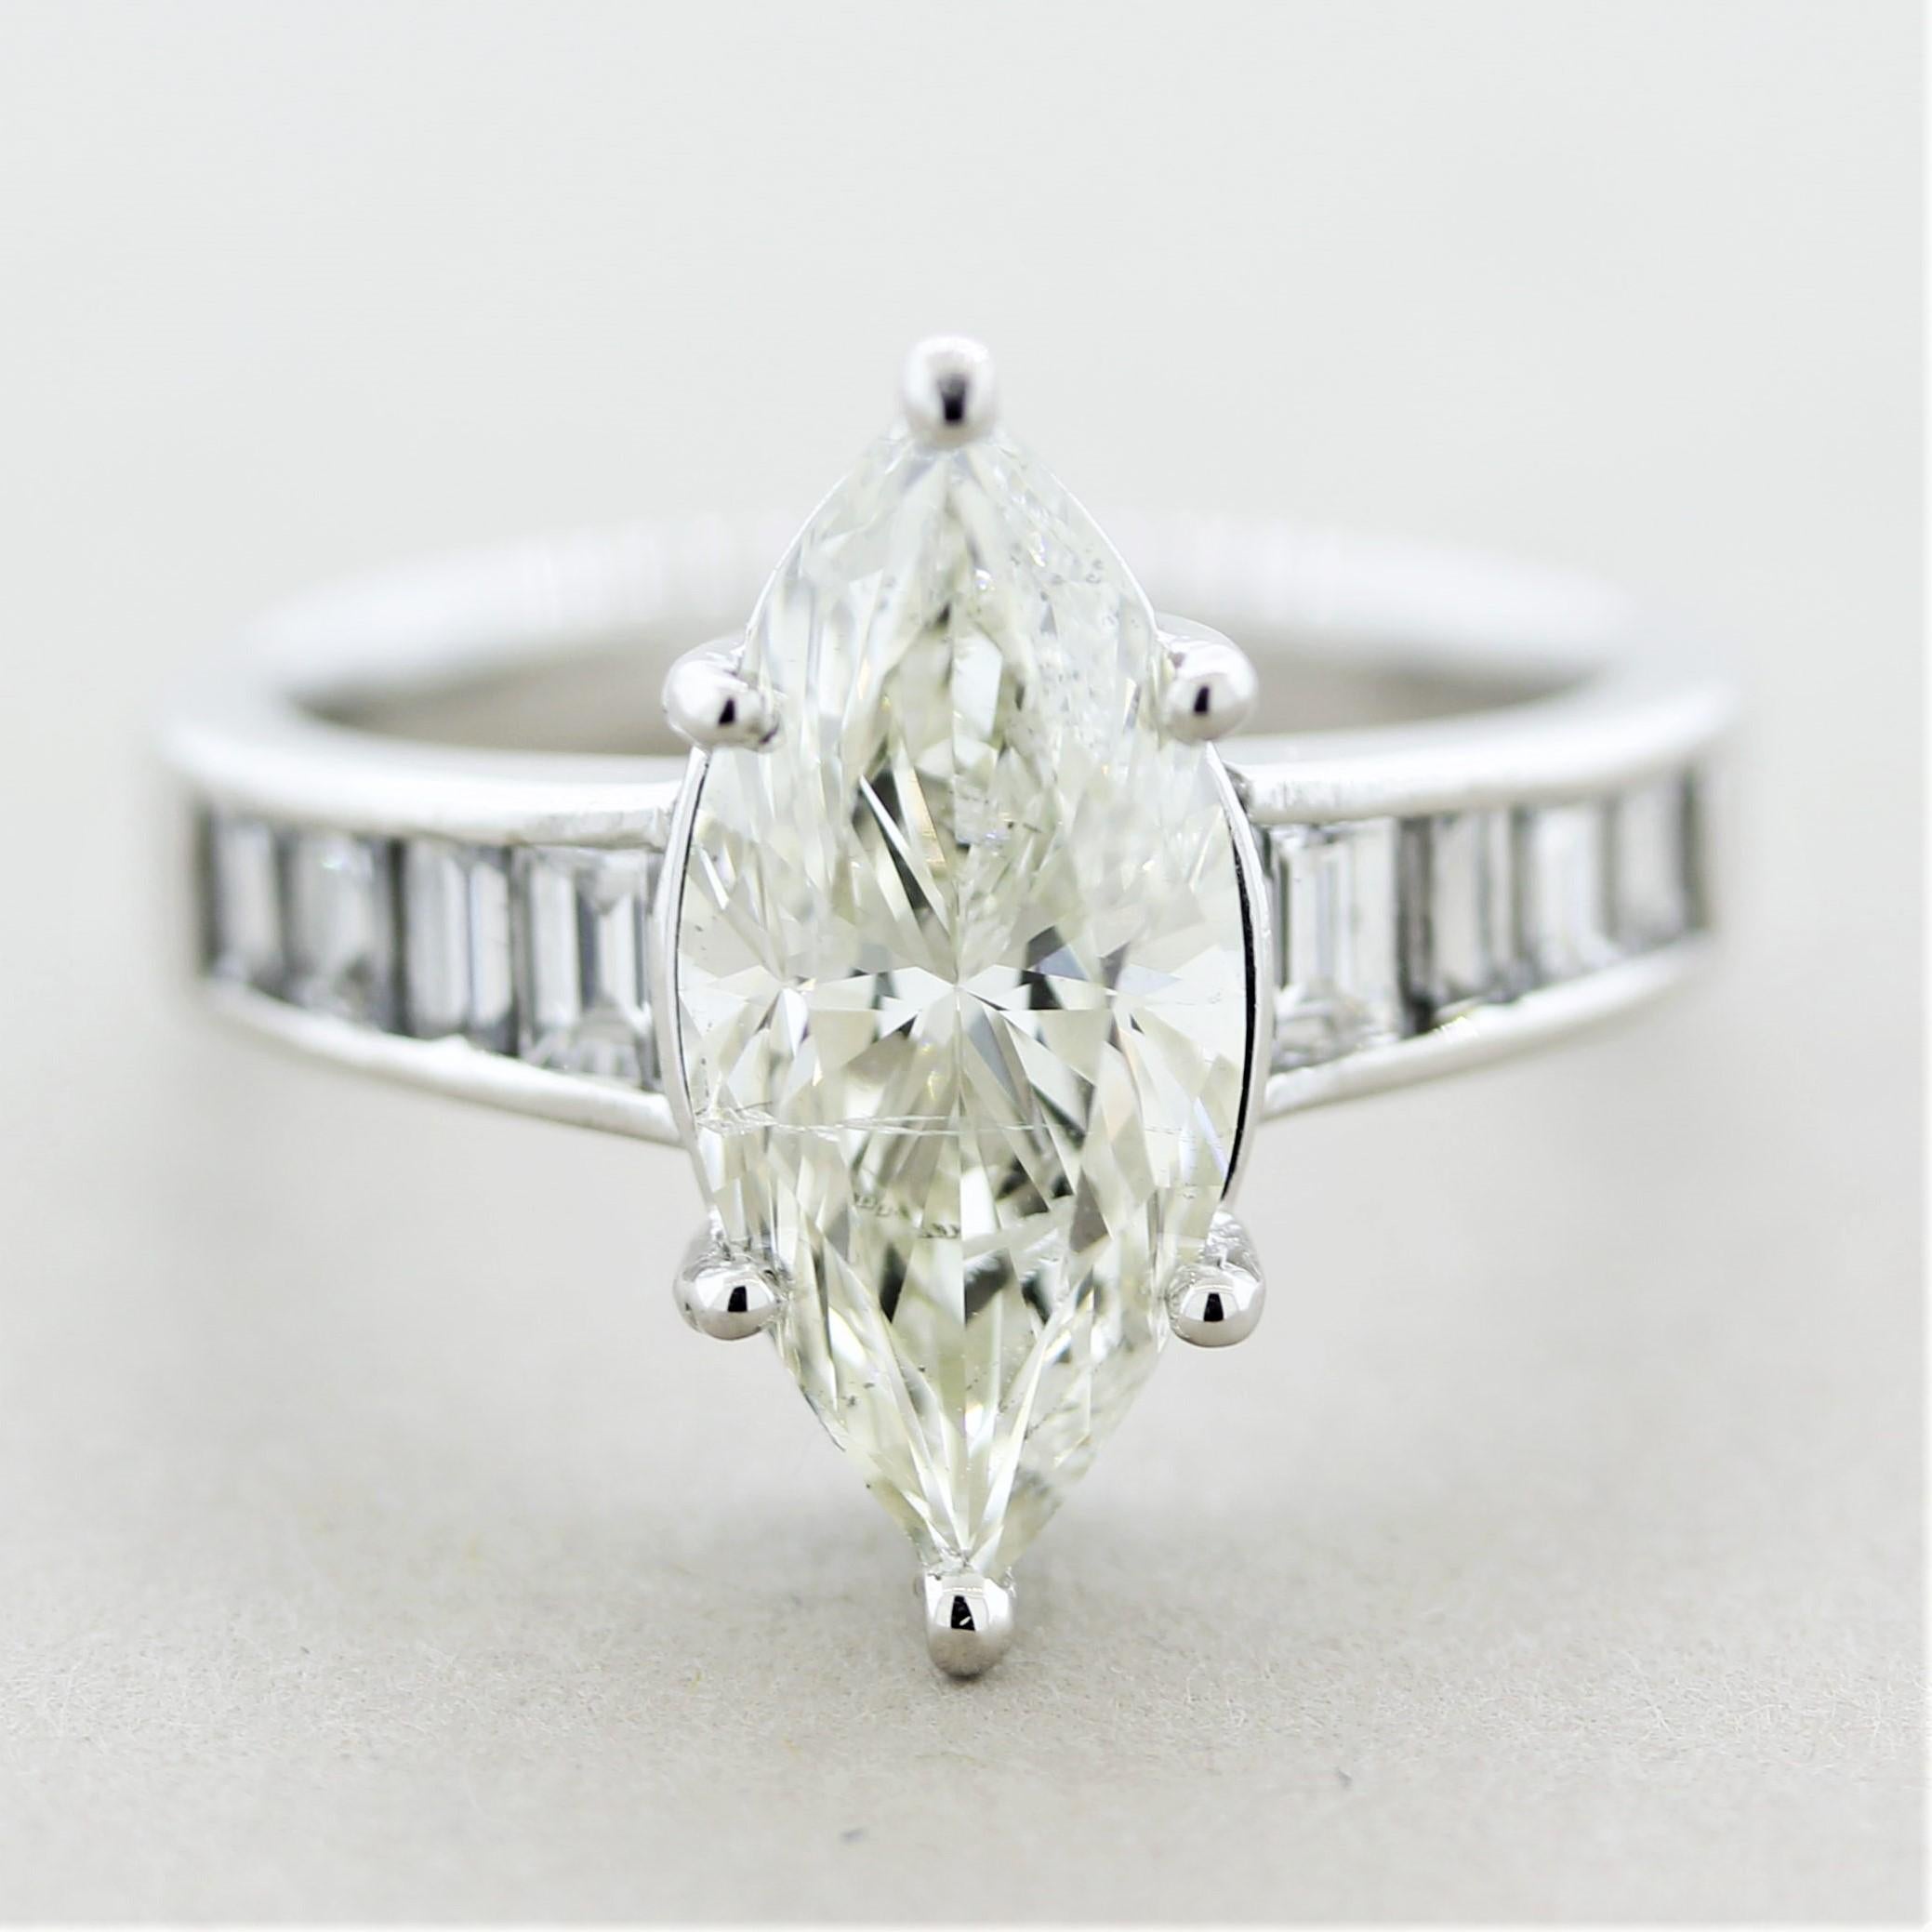 A lovely engagement ring featuring a 2.66 carat marquise-shape diamond! It has a long beautiful shape making it look like a 3 carat stone. It has a color of J-K and clarity grade of SI2. It is accented by 0.77 carats of baguette-cut diamonds which